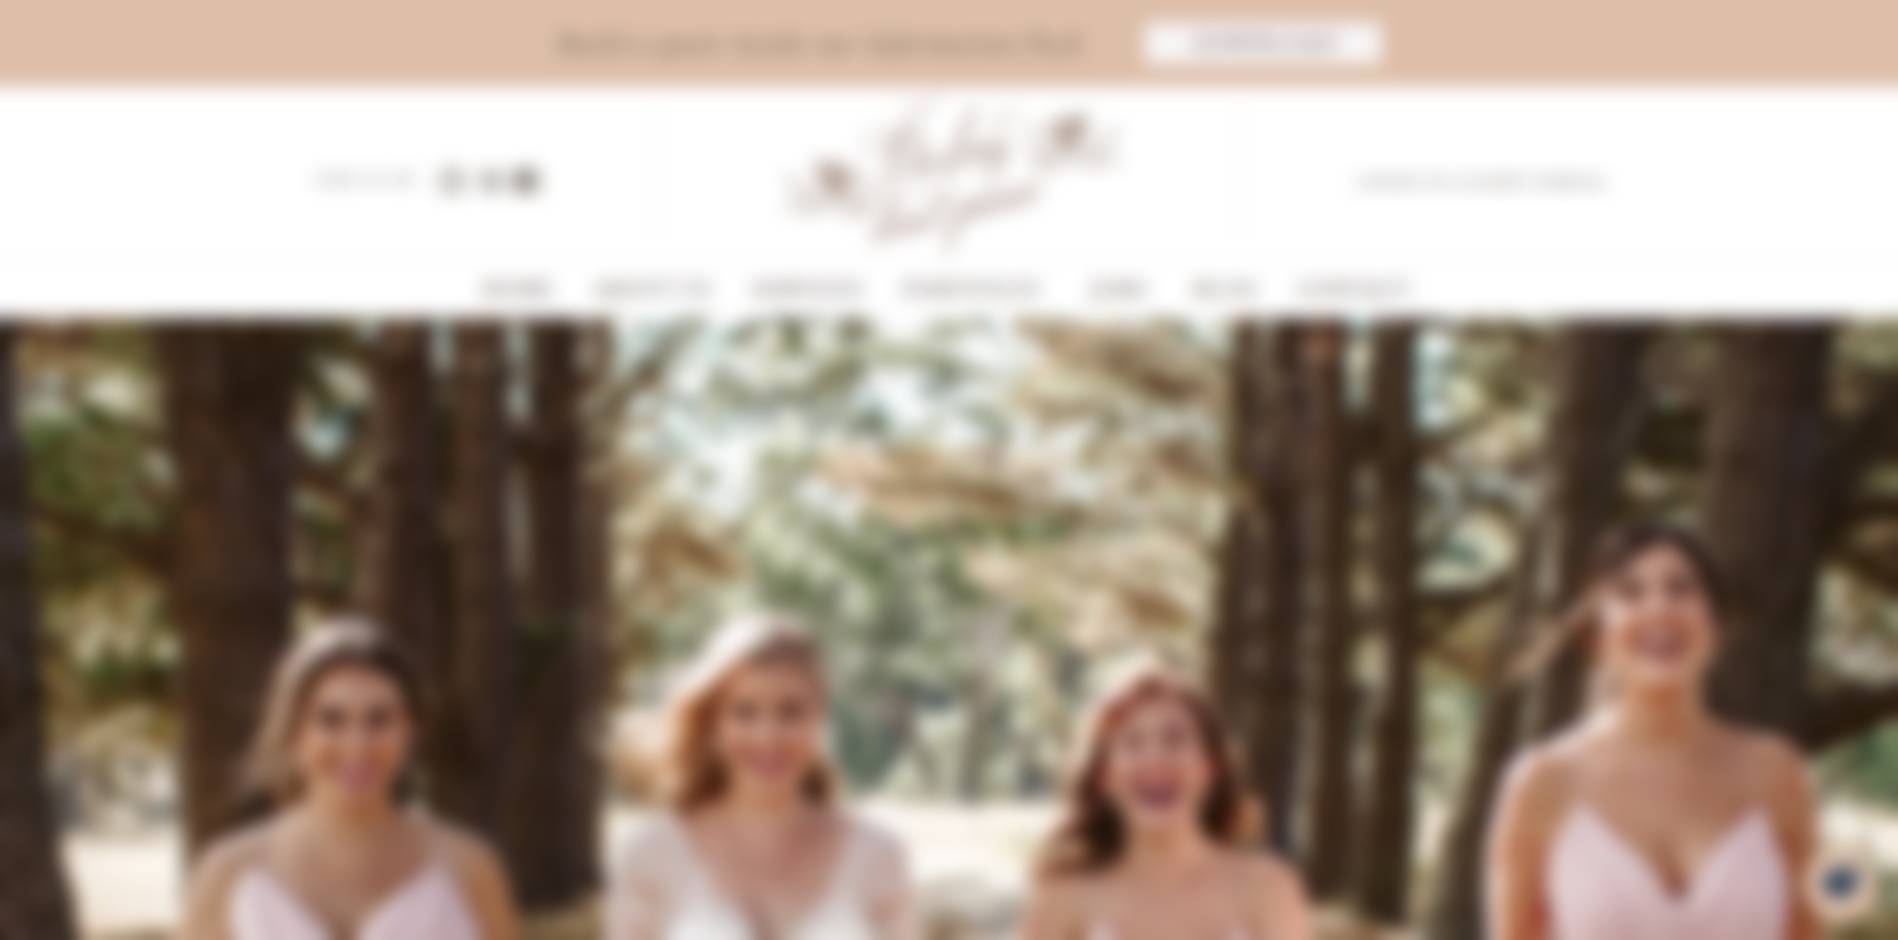 darling don’t panic wedding planner melbourne, victoria